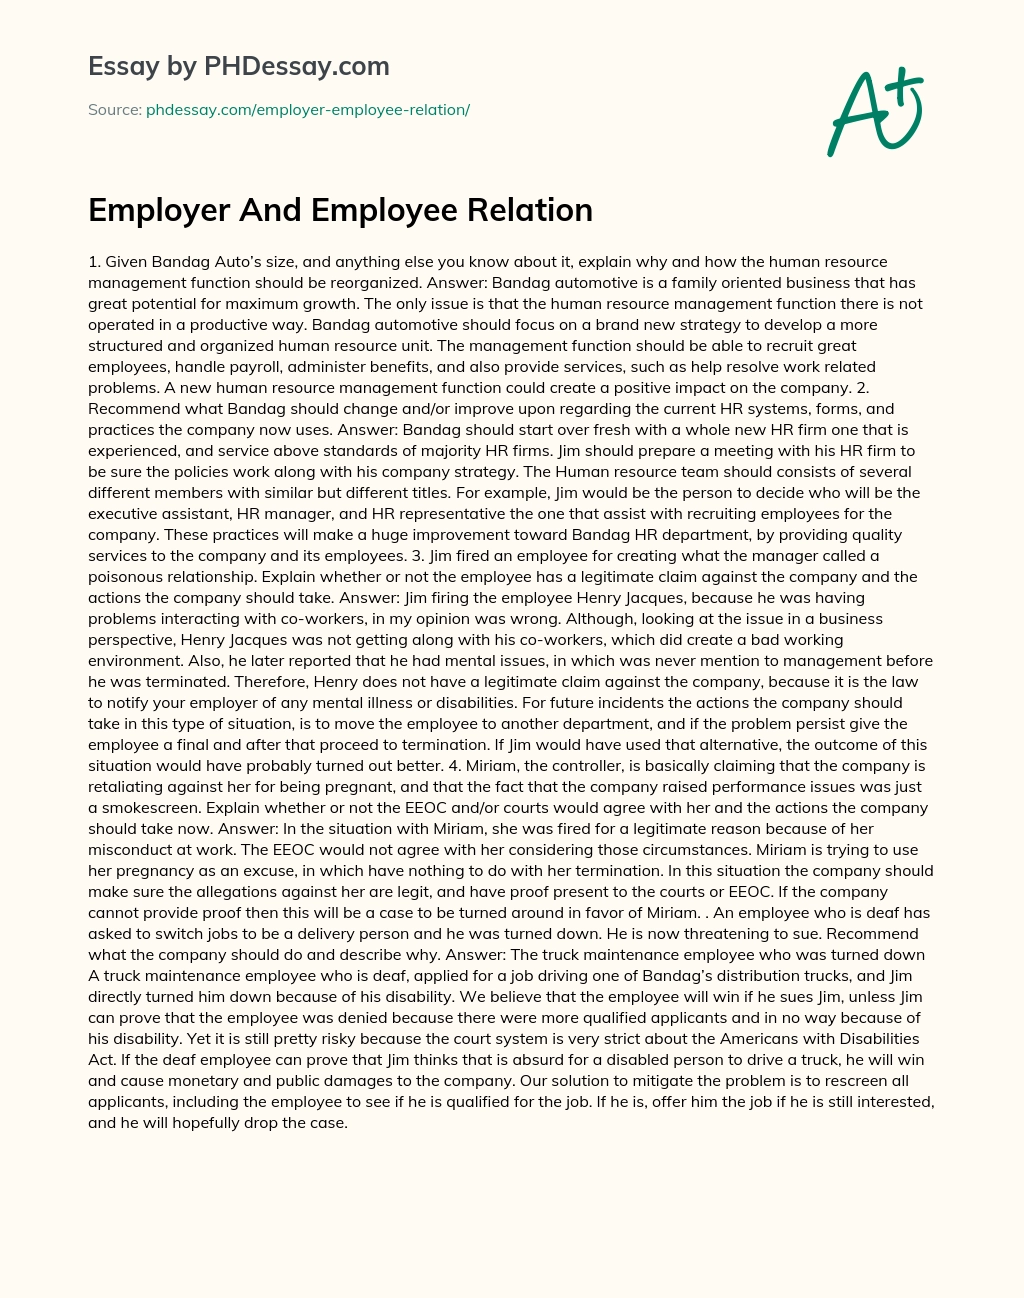 Employer And Employee Relation essay